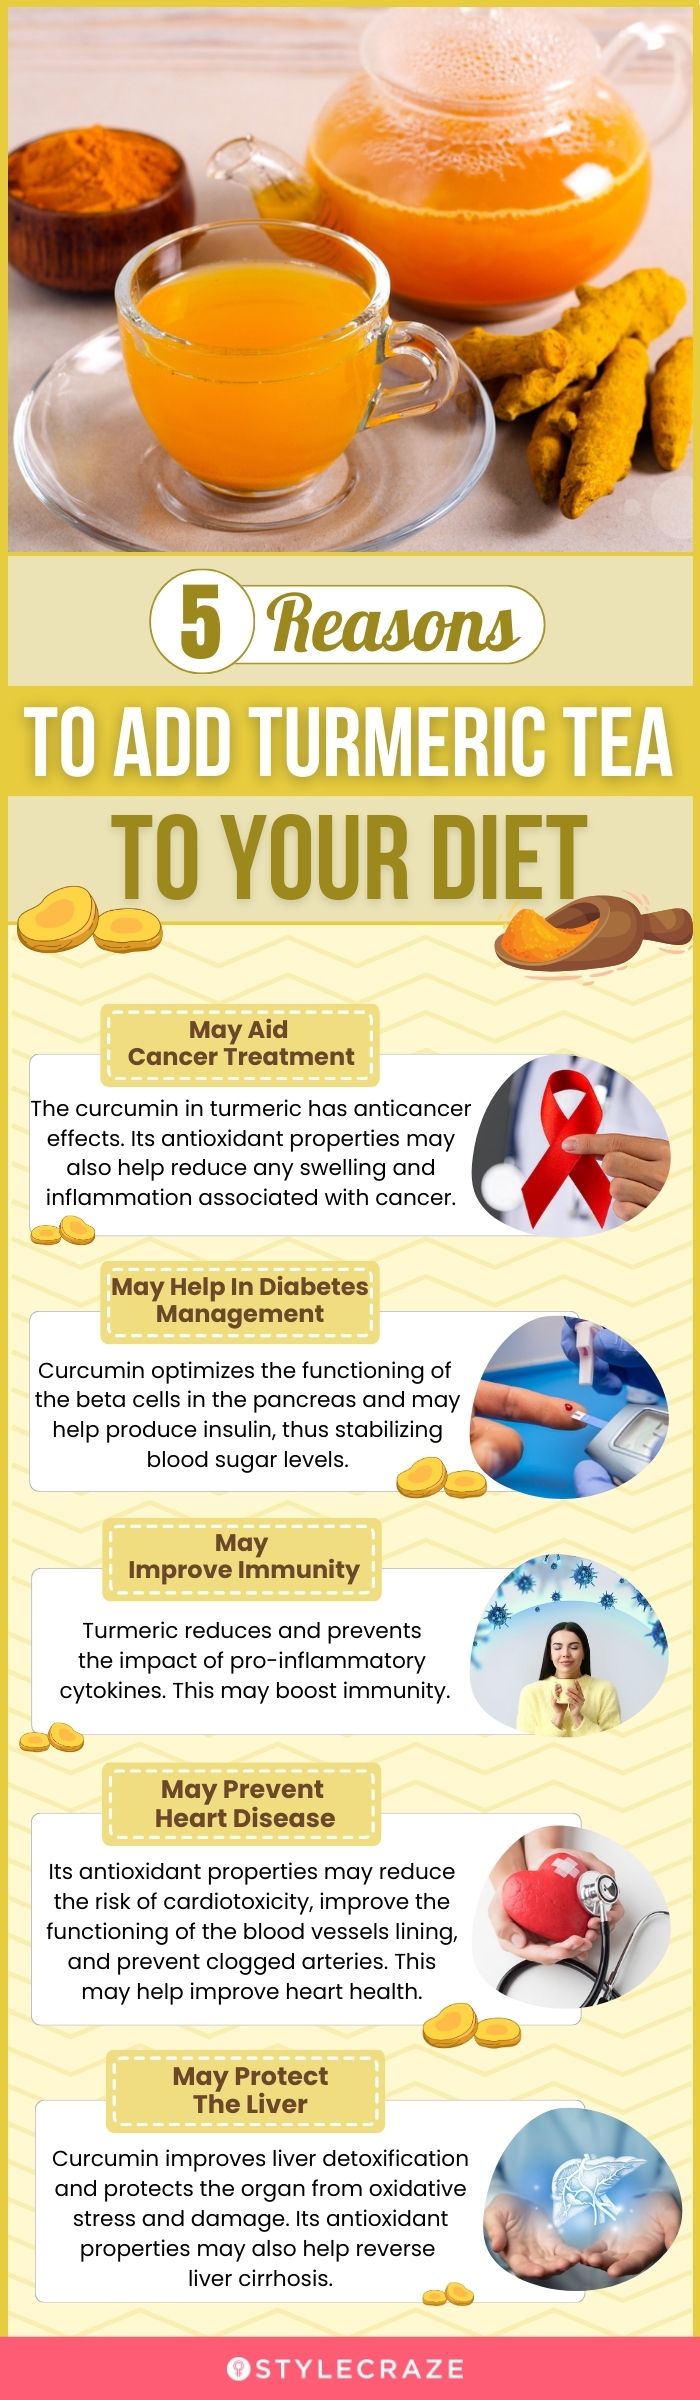 5 reasons to add turmeric tea in your diet (infographic)